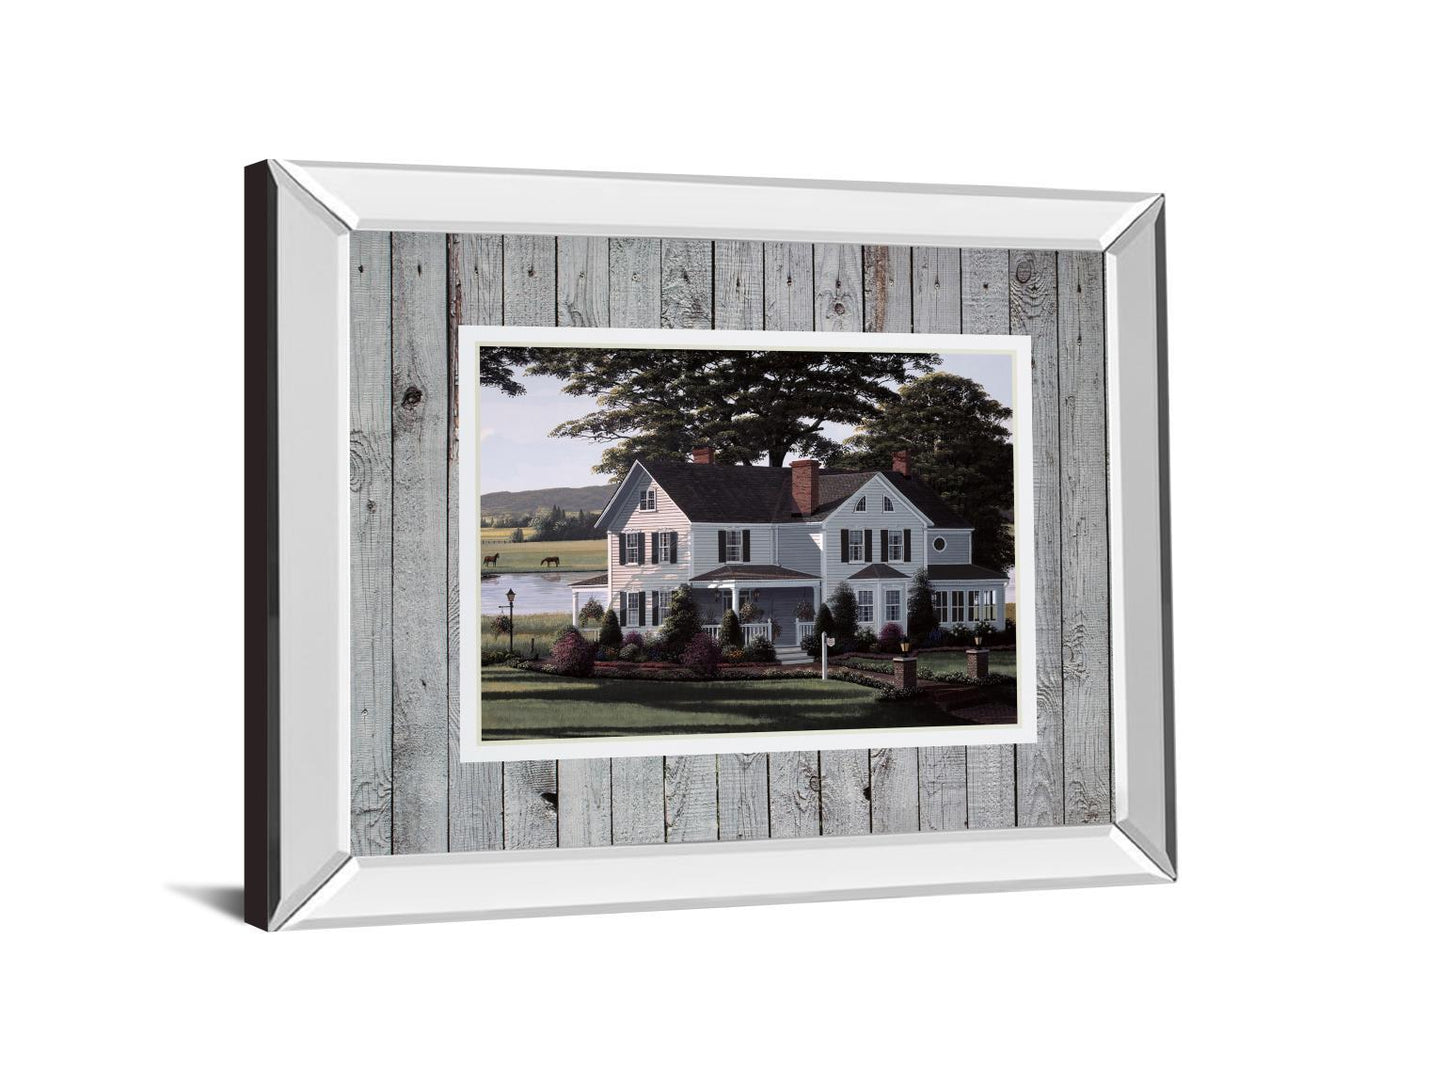 The Counrty Inn By Saunders B. Mirrored Frame - Green